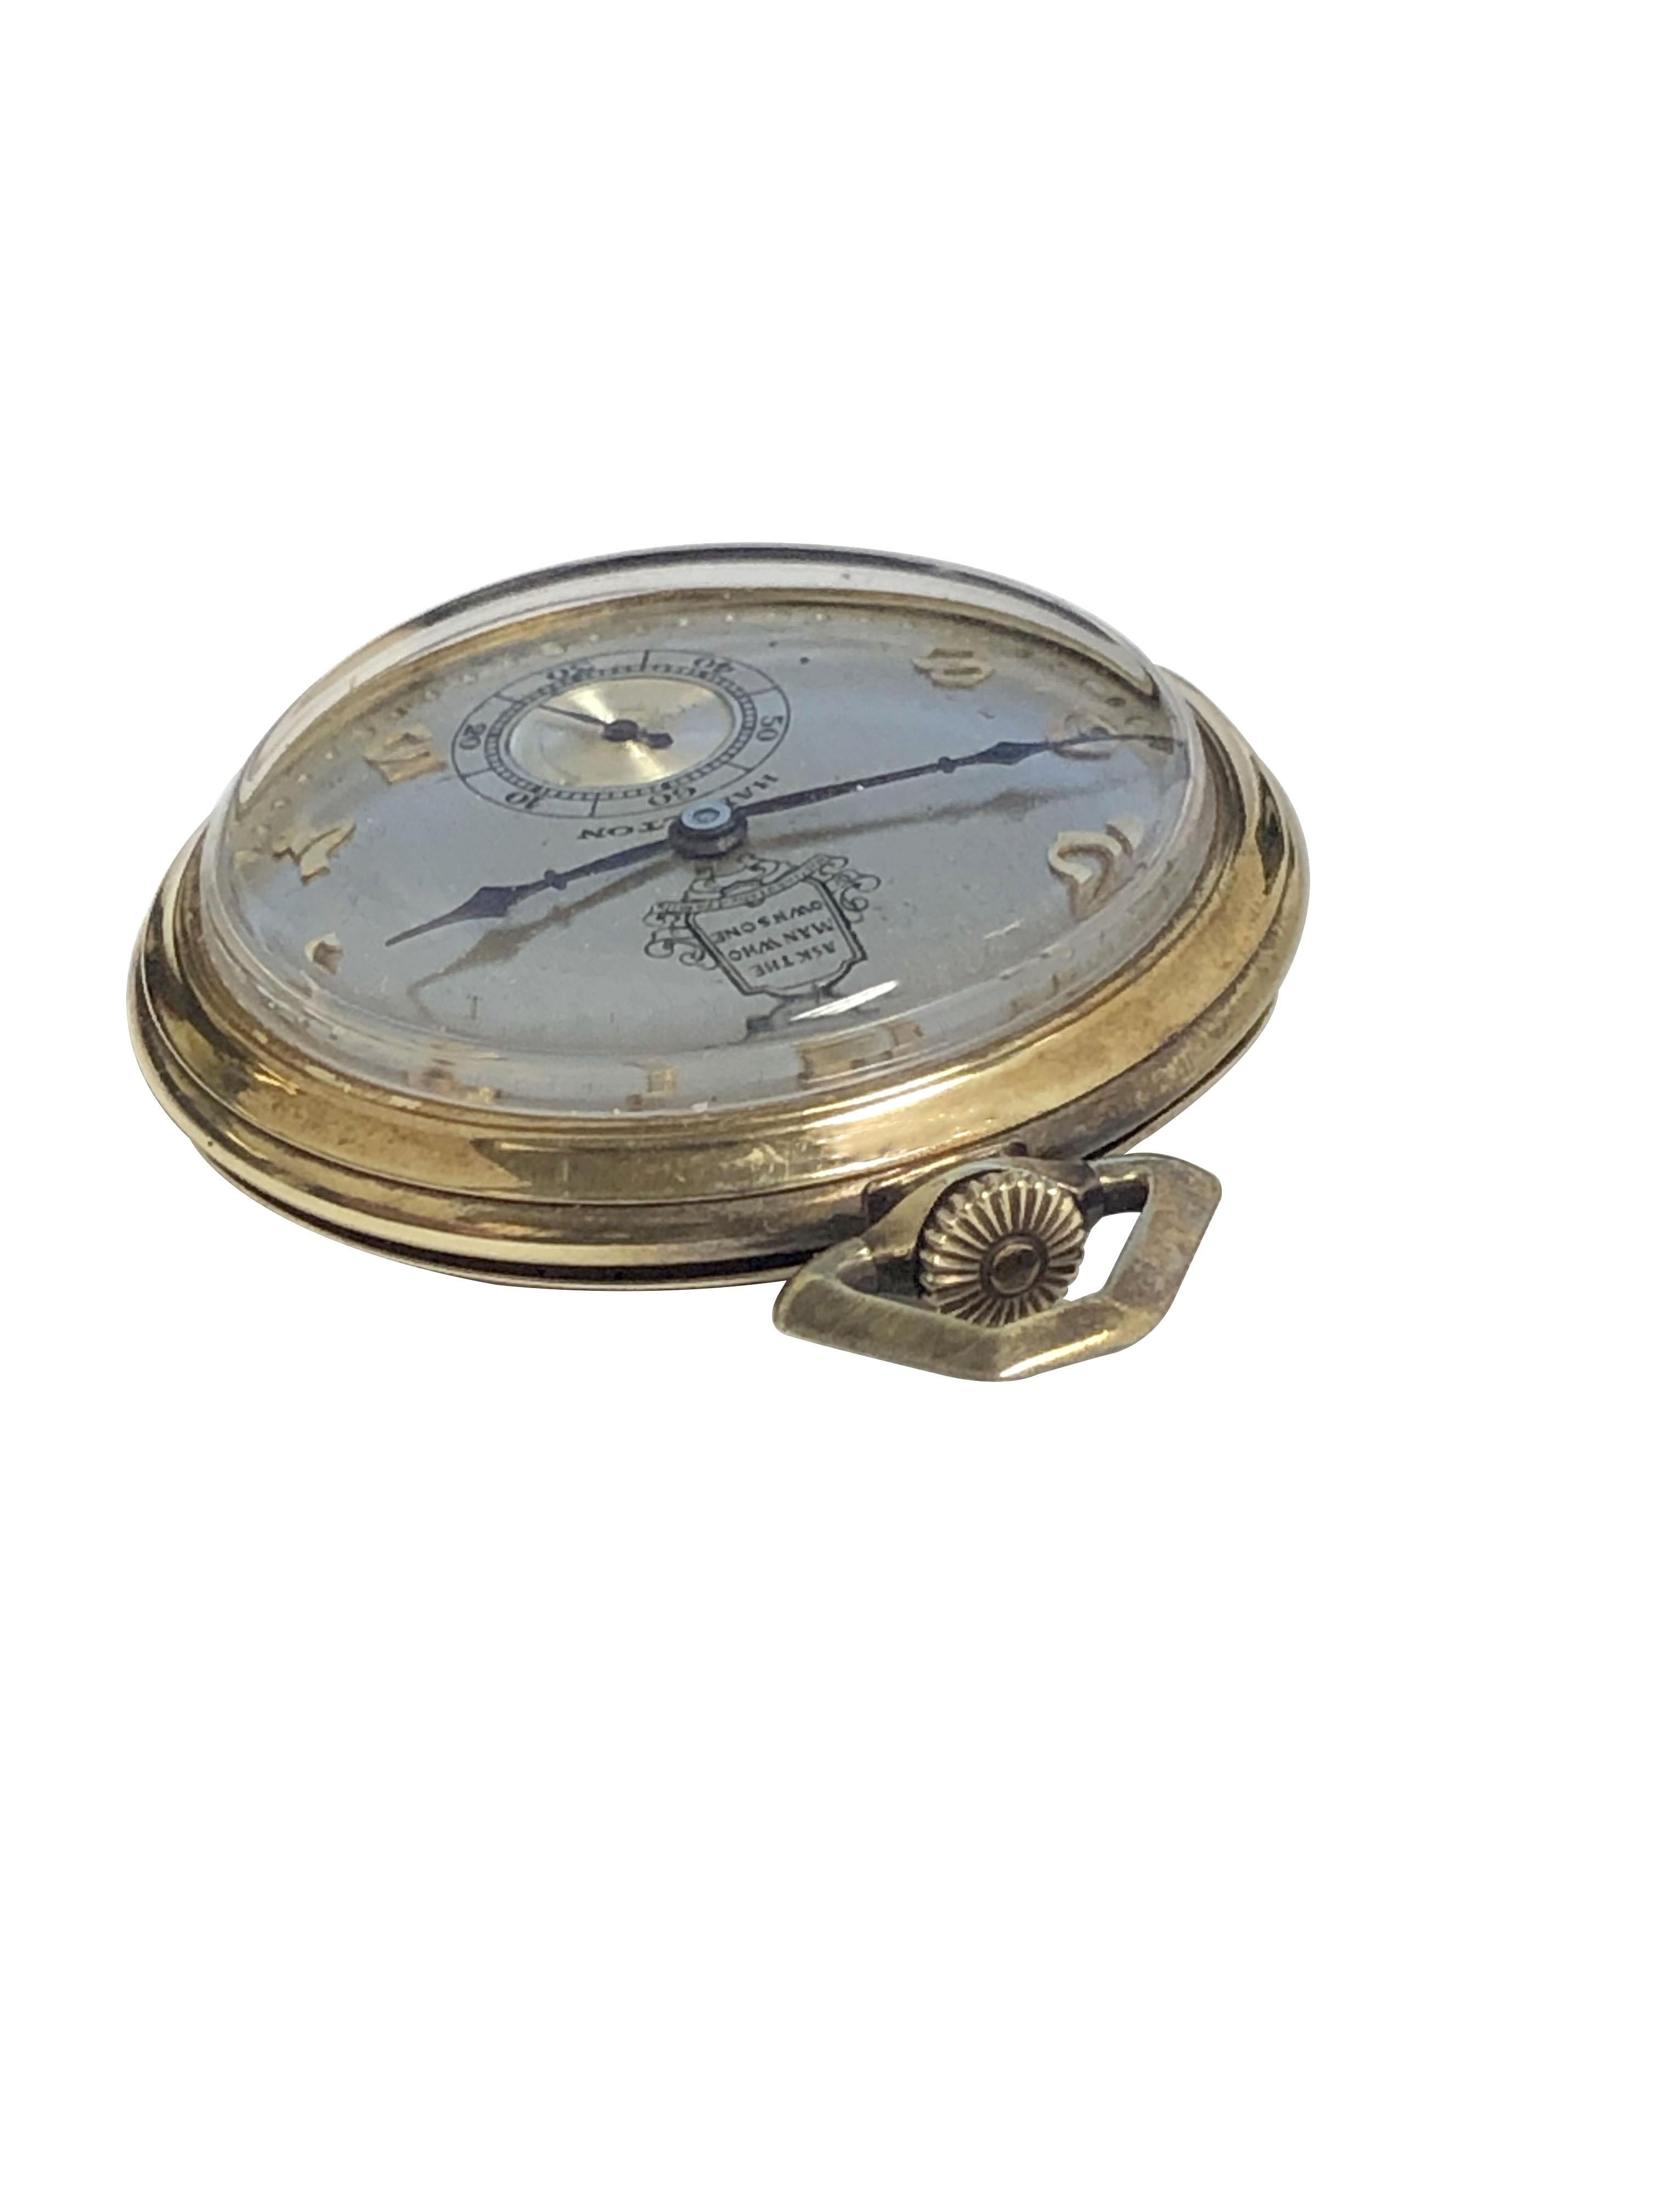 Circa 1930 Hamilton 12 Size Pocket watch, presentation from Packard Motor Car company, 45 M.M. 14k Yellow Gold 3 piece case with inside dust cover featuring hand engraved presentation, 19 Jewel, Grade 918, mechanical, manual wind movement. Silver